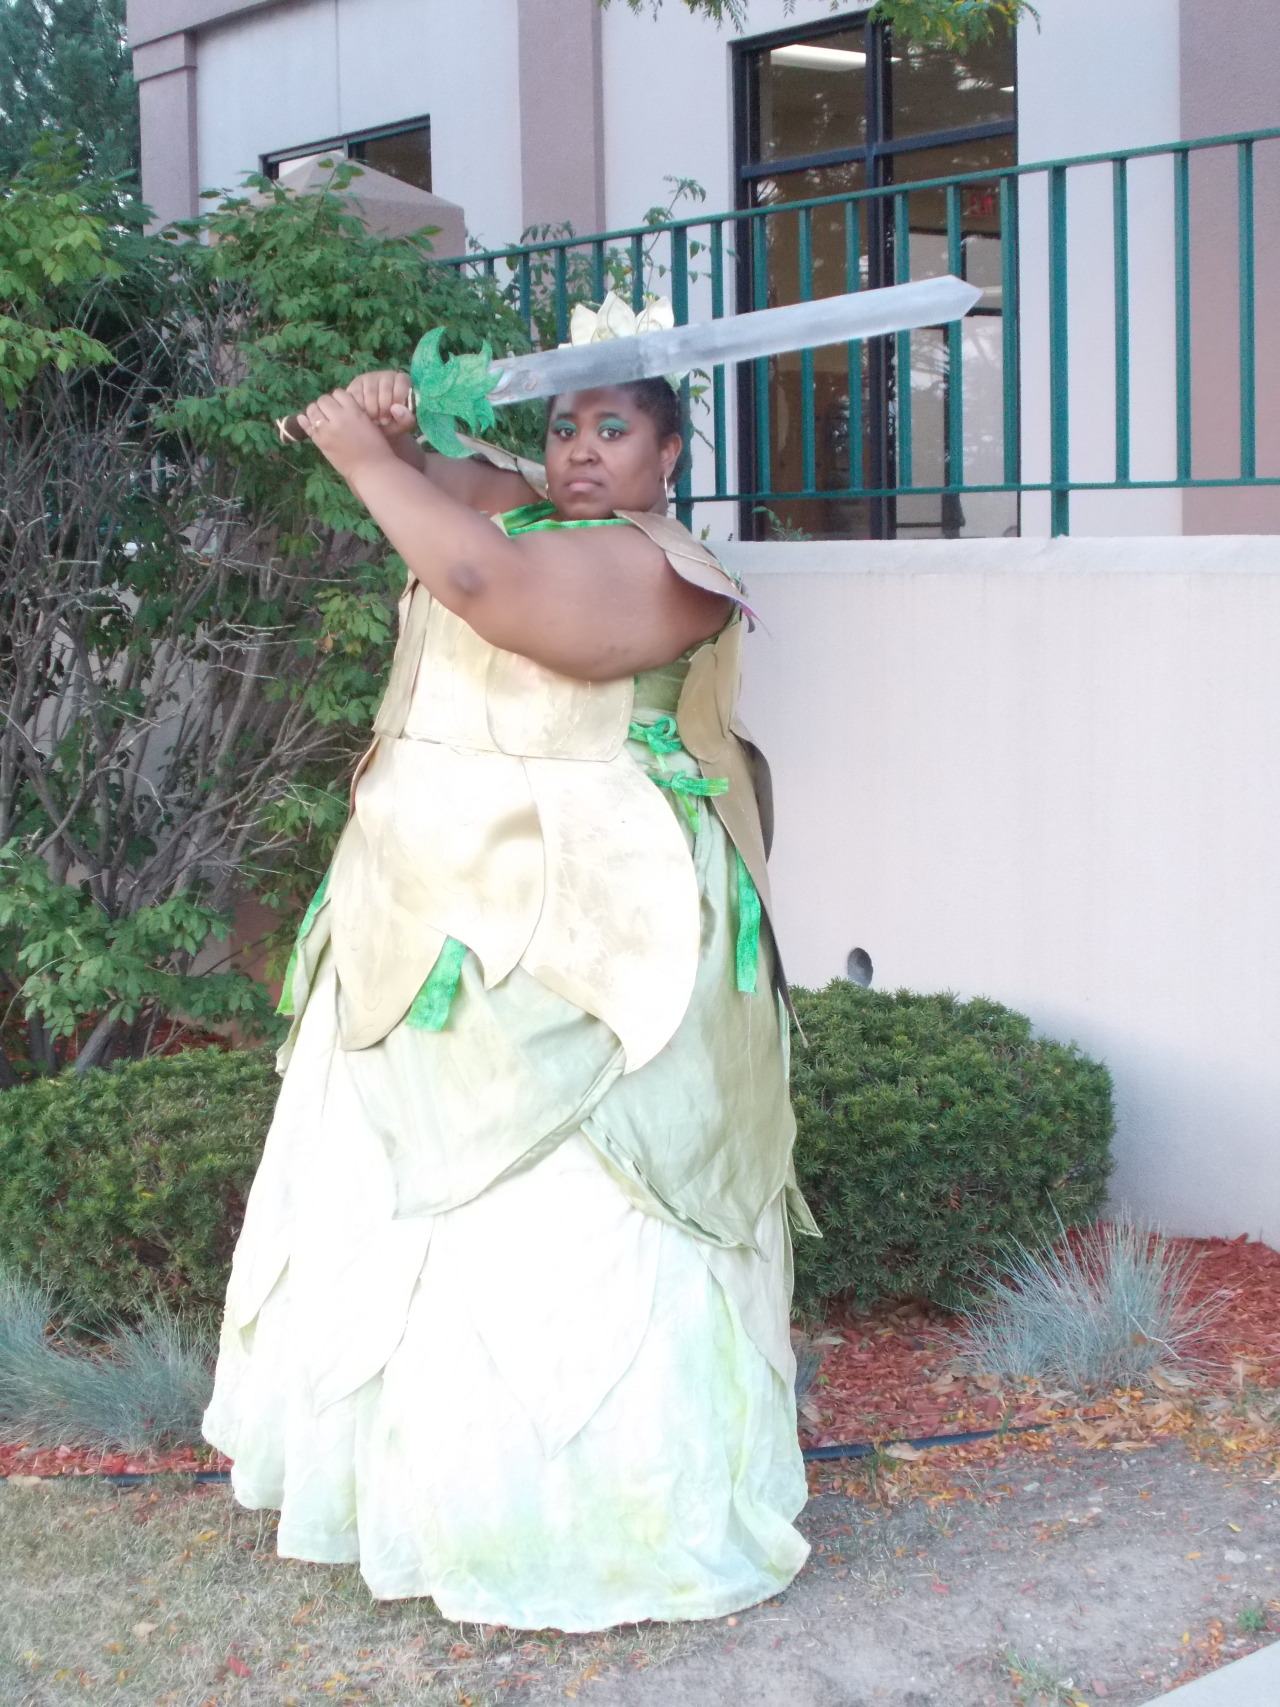 brichibi:  Here’s the finished Armored Princess Tiana cosplay!  The first picture